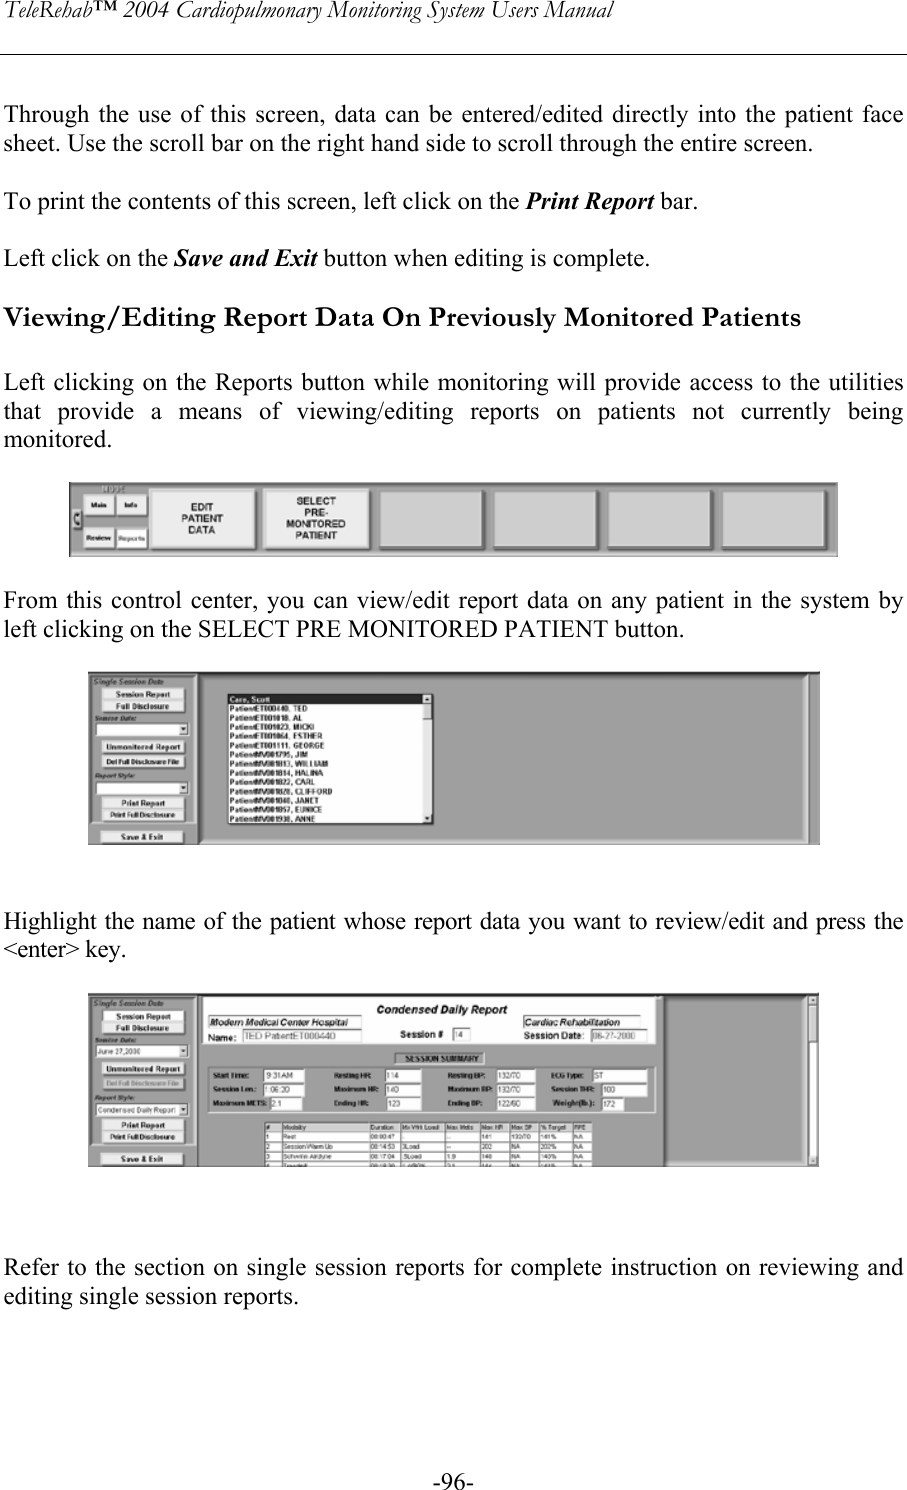 TeleRehab™ 2004 Cardiopulmonary Monitoring System Users Manual    -96- Through the use of this screen, data can be entered/edited directly into the patient face sheet. Use the scroll bar on the right hand side to scroll through the entire screen.  To print the contents of this screen, left click on the Print Report bar.  Left click on the Save and Exit button when editing is complete.  Viewing/Editing Report Data On Previously Monitored Patients  Left clicking on the Reports button while monitoring will provide access to the utilities that provide a means of viewing/editing reports on patients not currently being monitored.    From this control center, you can view/edit report data on any patient in the system by left clicking on the SELECT PRE MONITORED PATIENT button.     Highlight the name of the patient whose report data you want to review/edit and press the &lt;enter&gt; key.      Refer to the section on single session reports for complete instruction on reviewing and editing single session reports.    